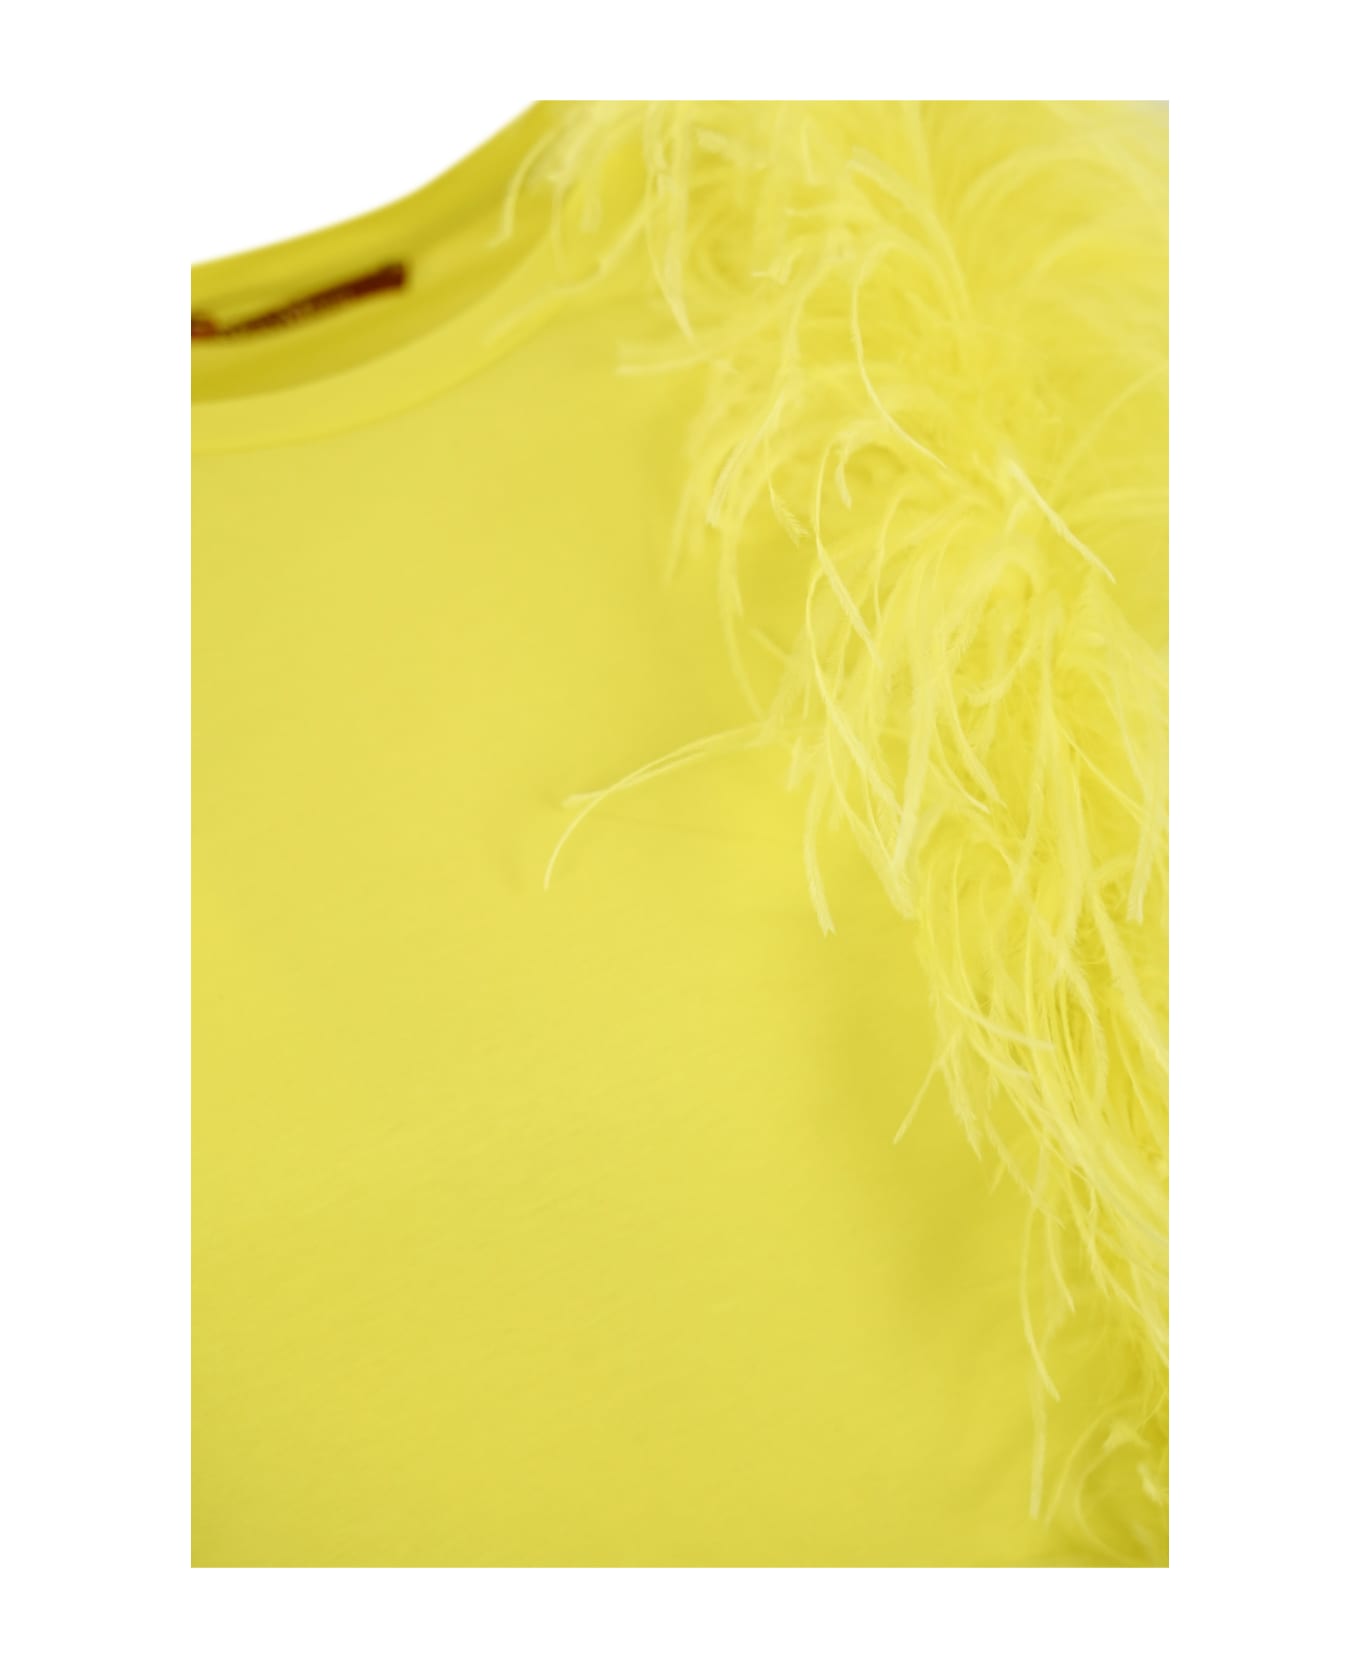 Max Mara Studio Cotton T-shirt With Feathers - Limone